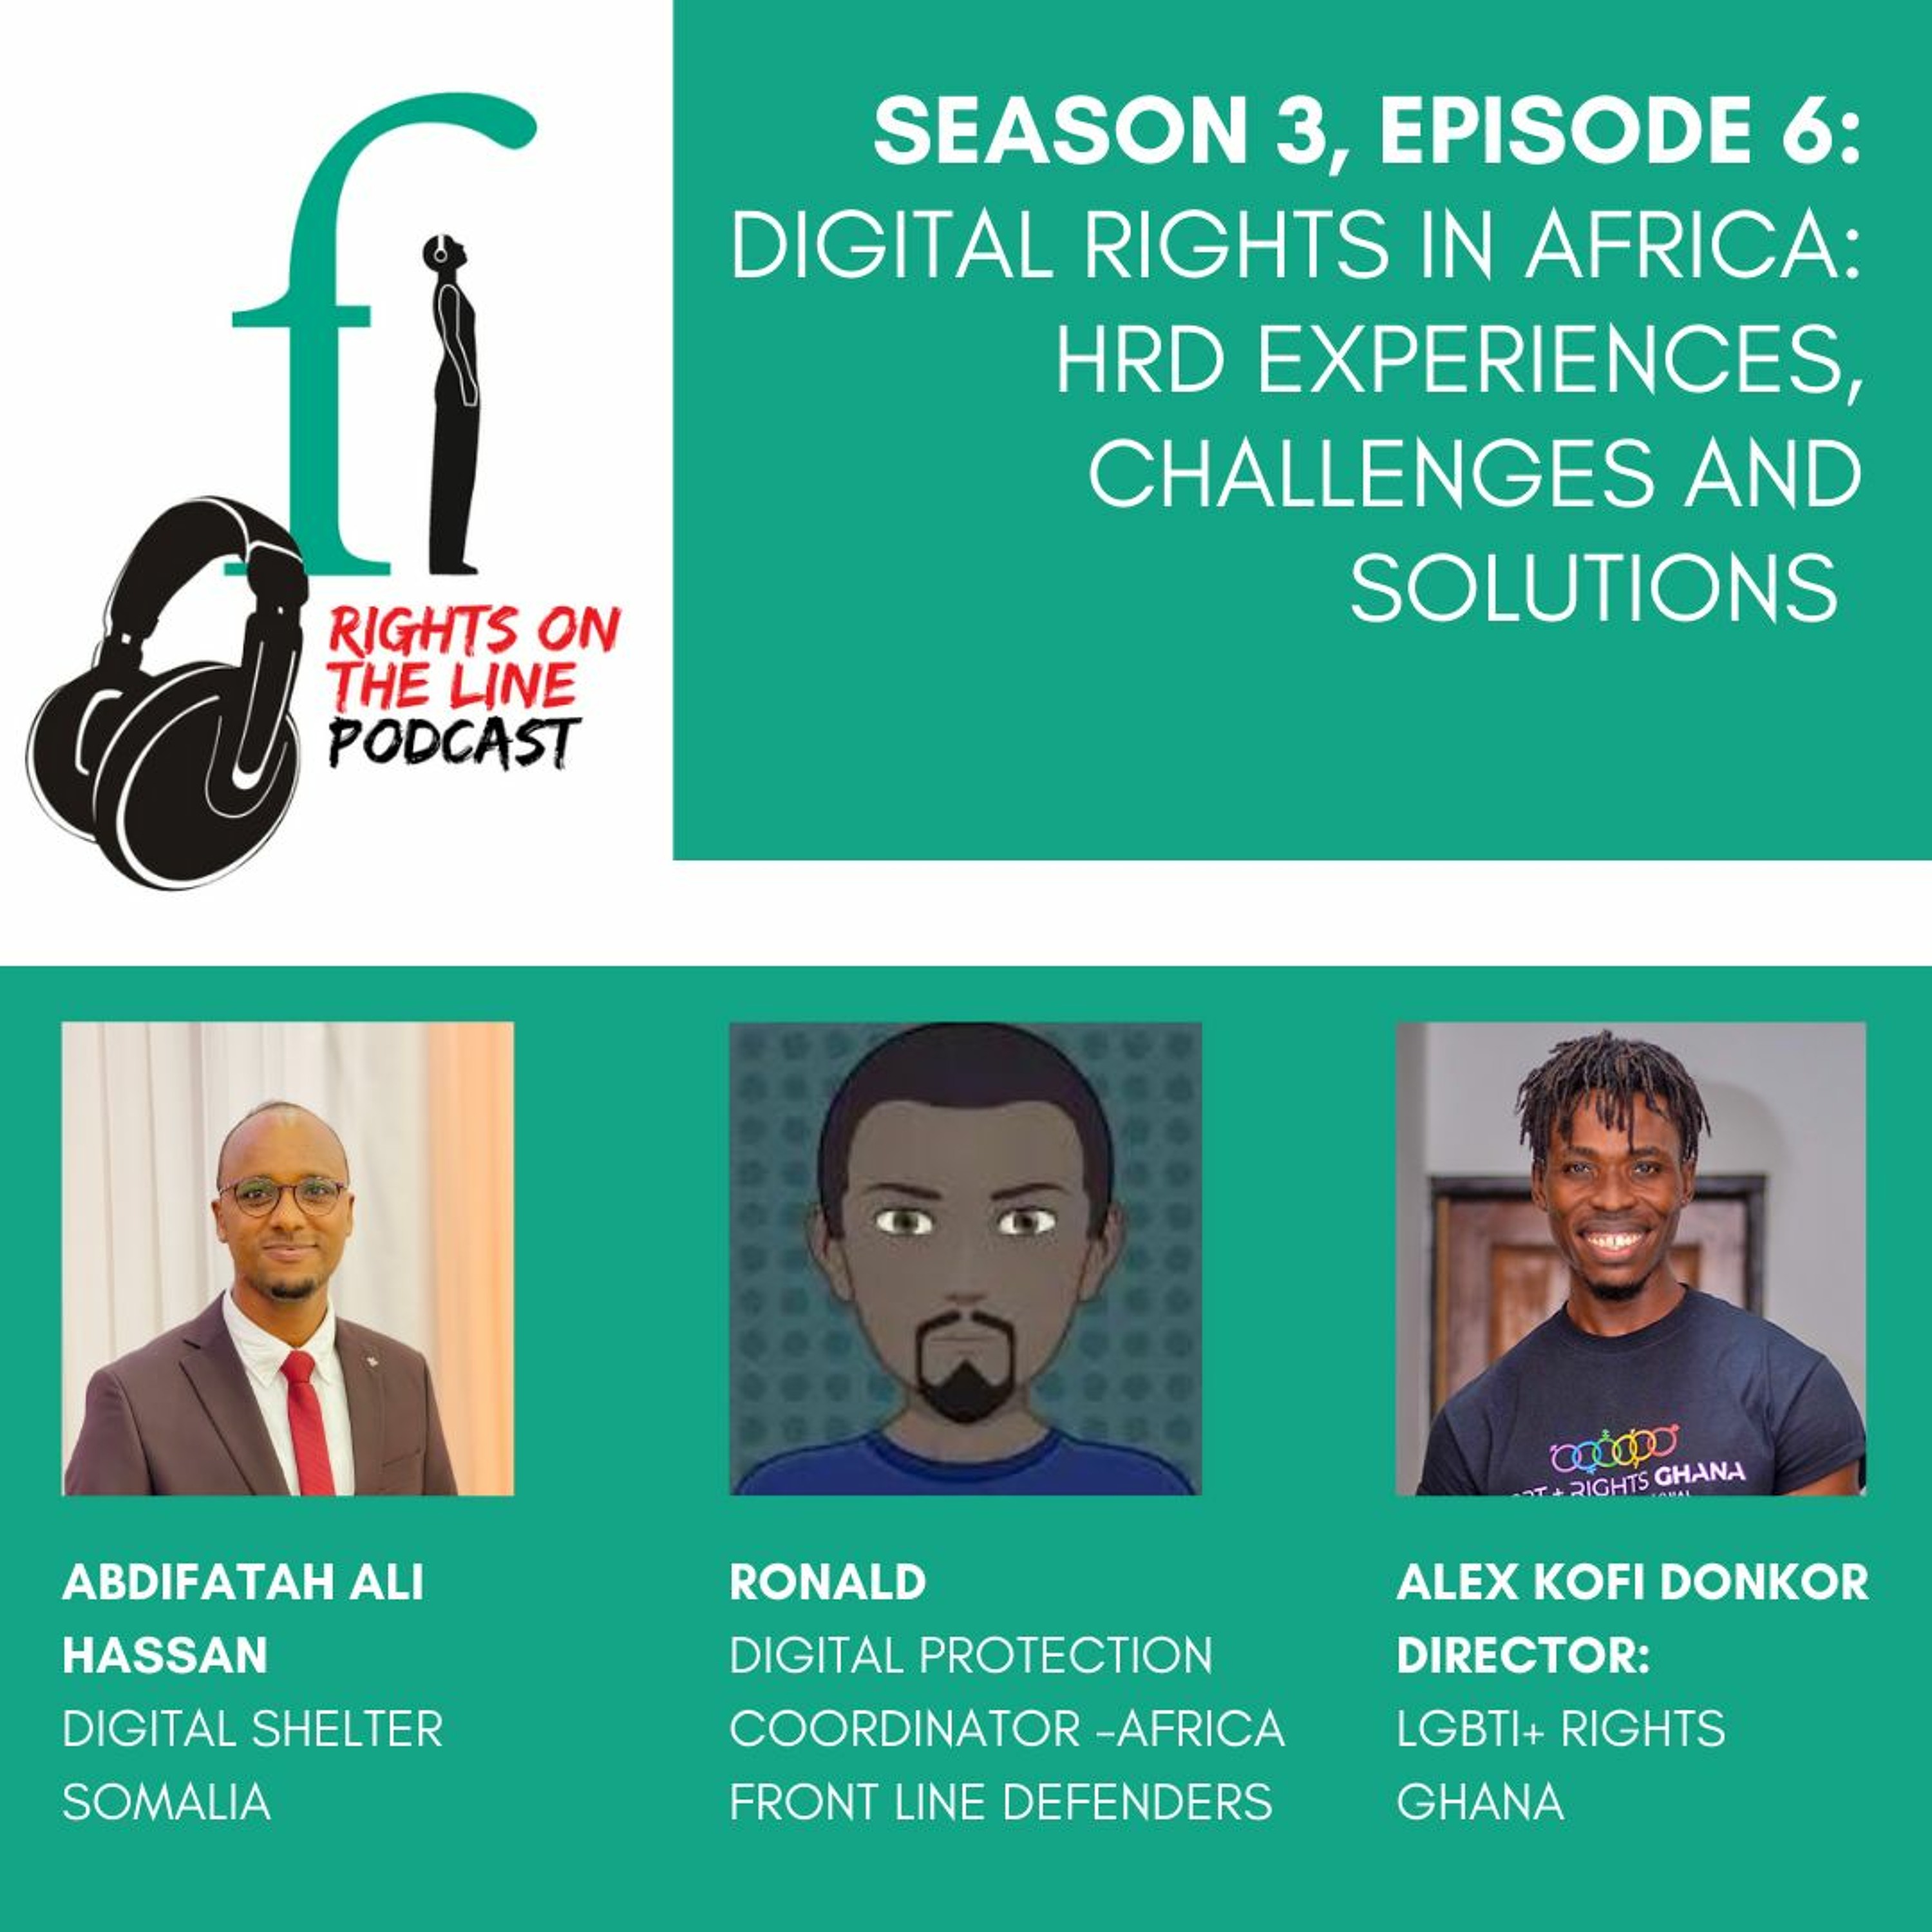 Digital Rights in Africa: HRD experiences, challenges and solutions